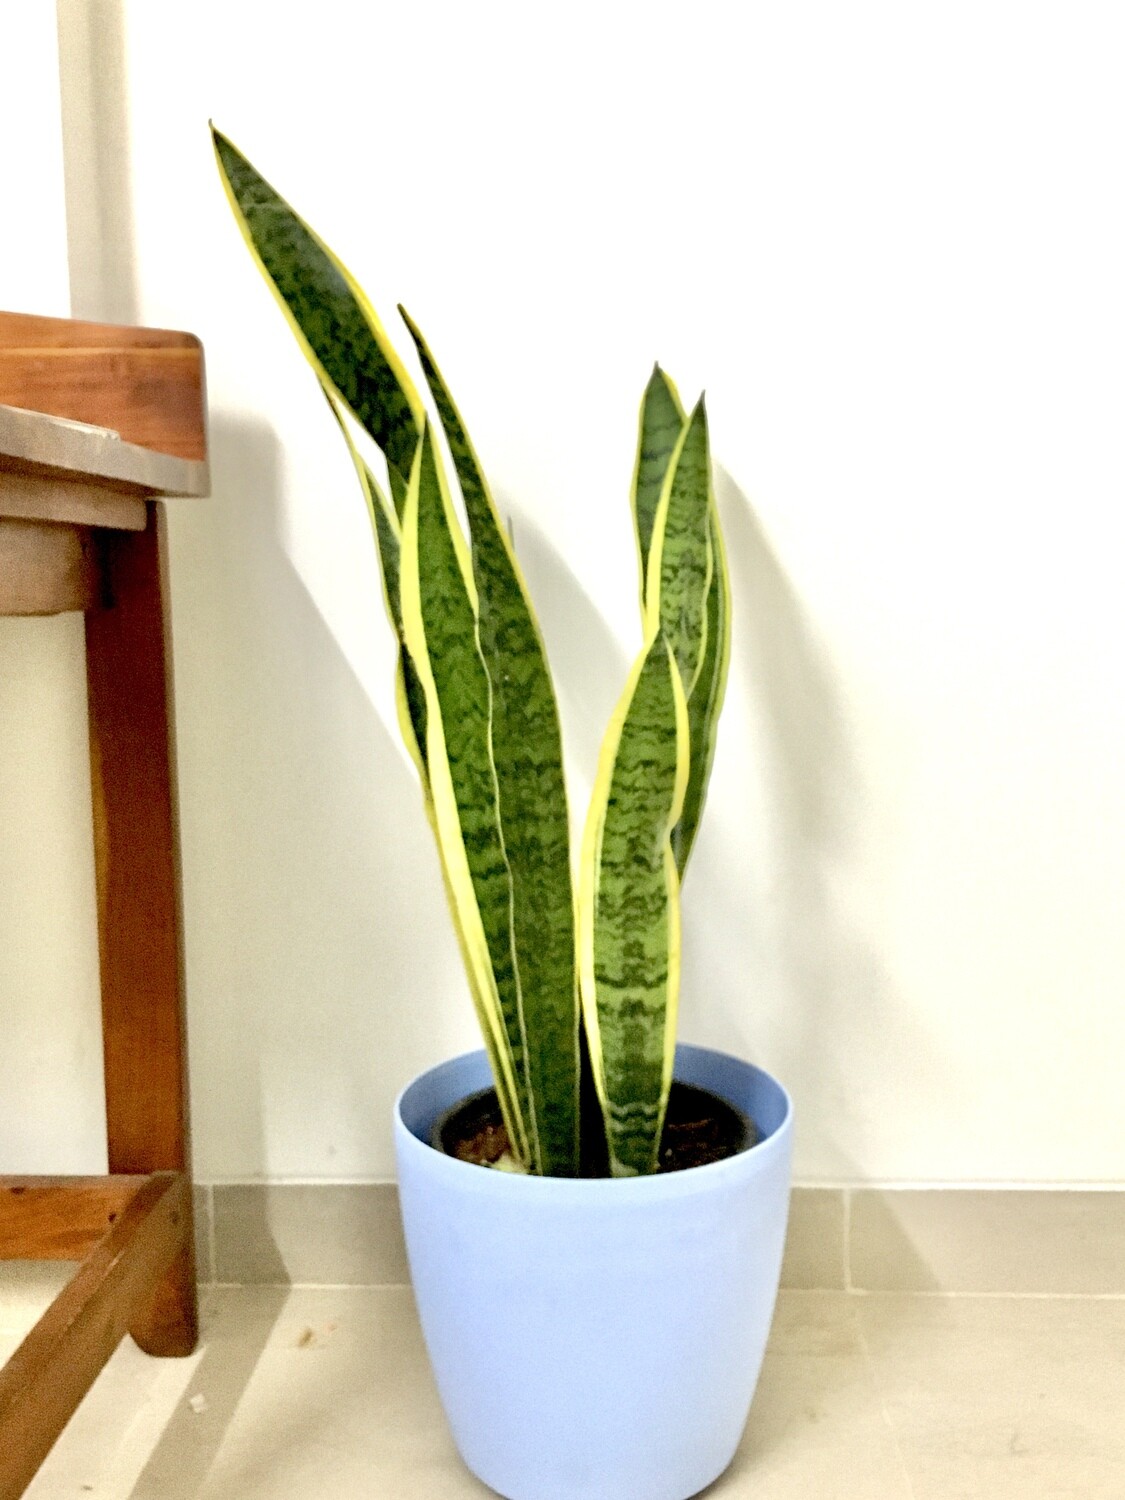 Sansevieria Plant Golden long - Snake Plant 3 feet in 11 inches Round Pot with Wheels